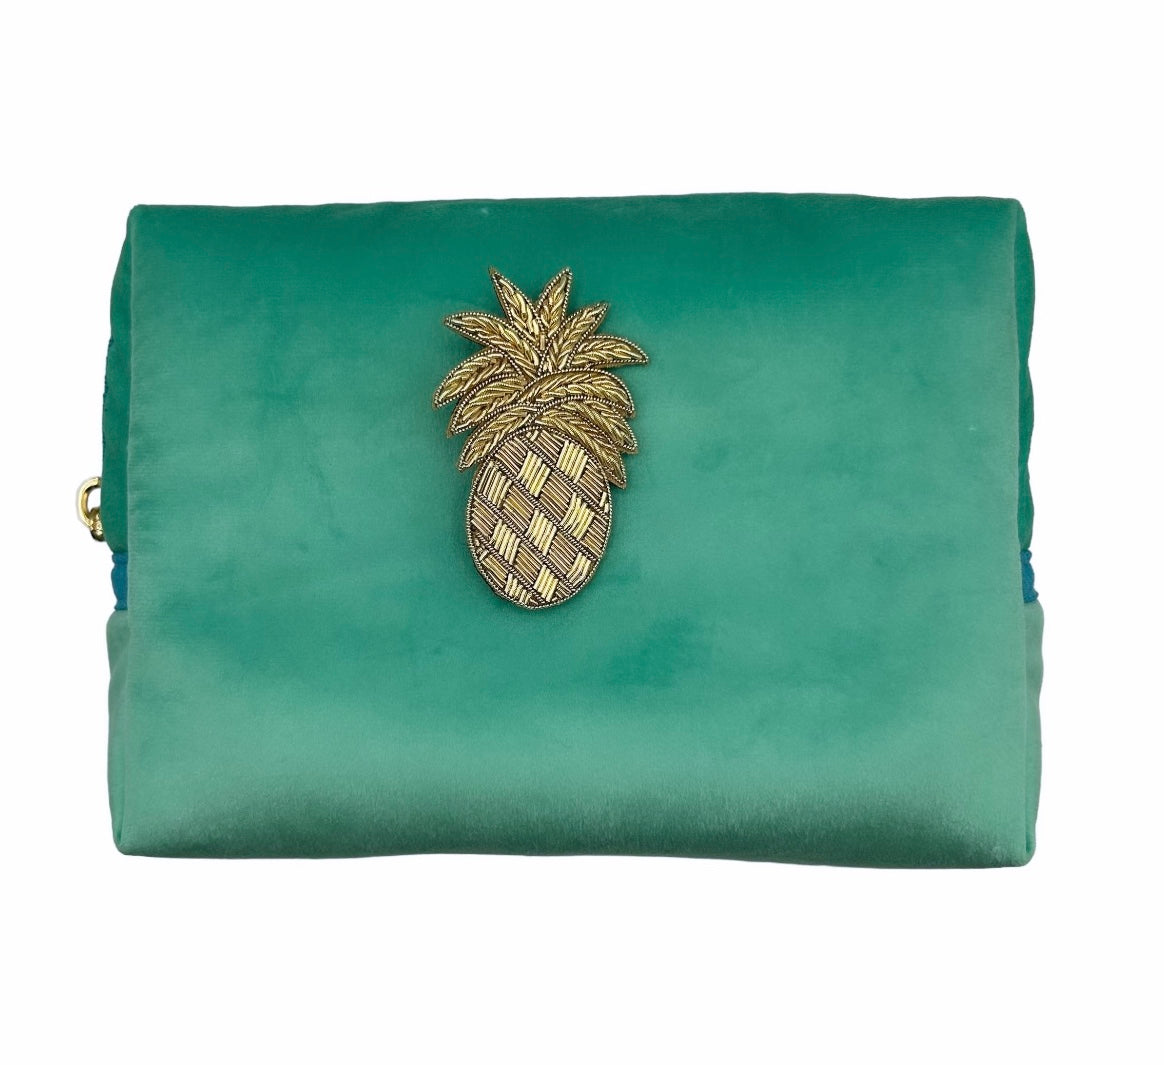 Marine make-up bag & gold pineapple brooch - recycled velvet, large and small